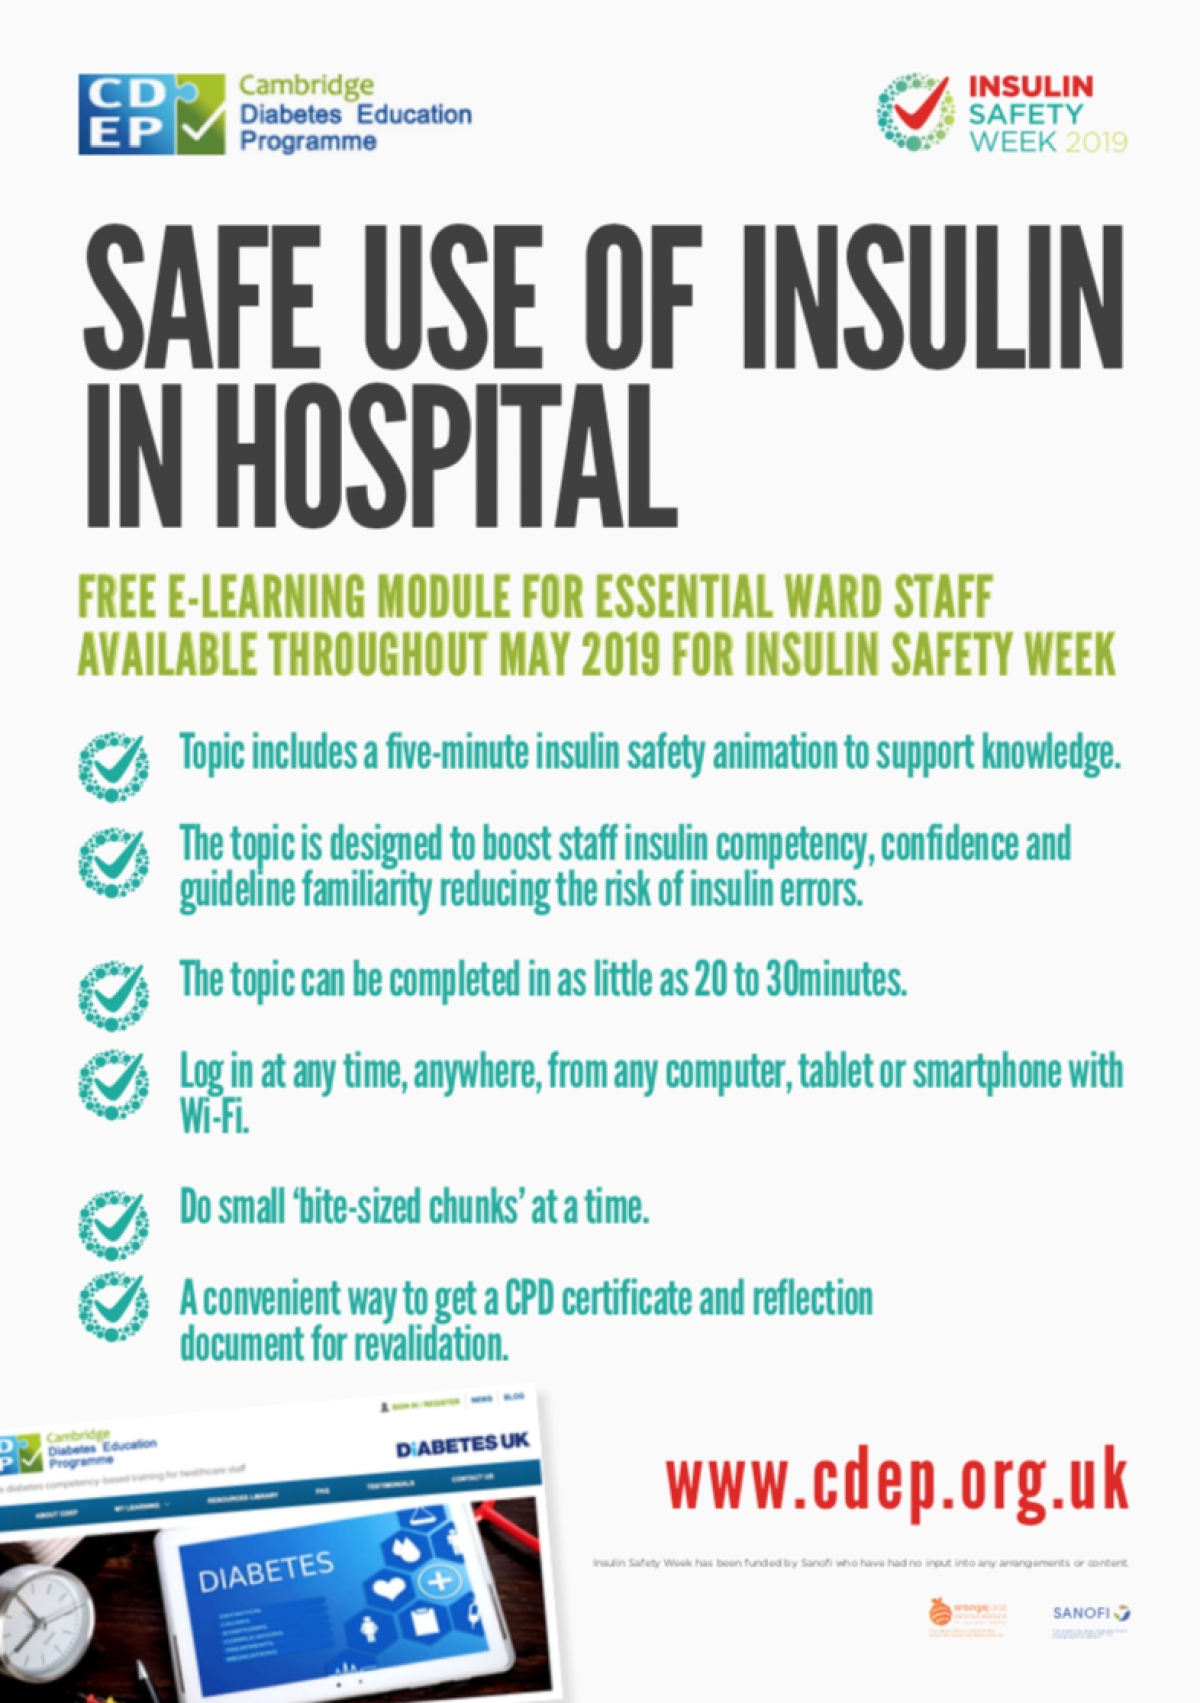 Insulin Safety Week is coming soon!!!